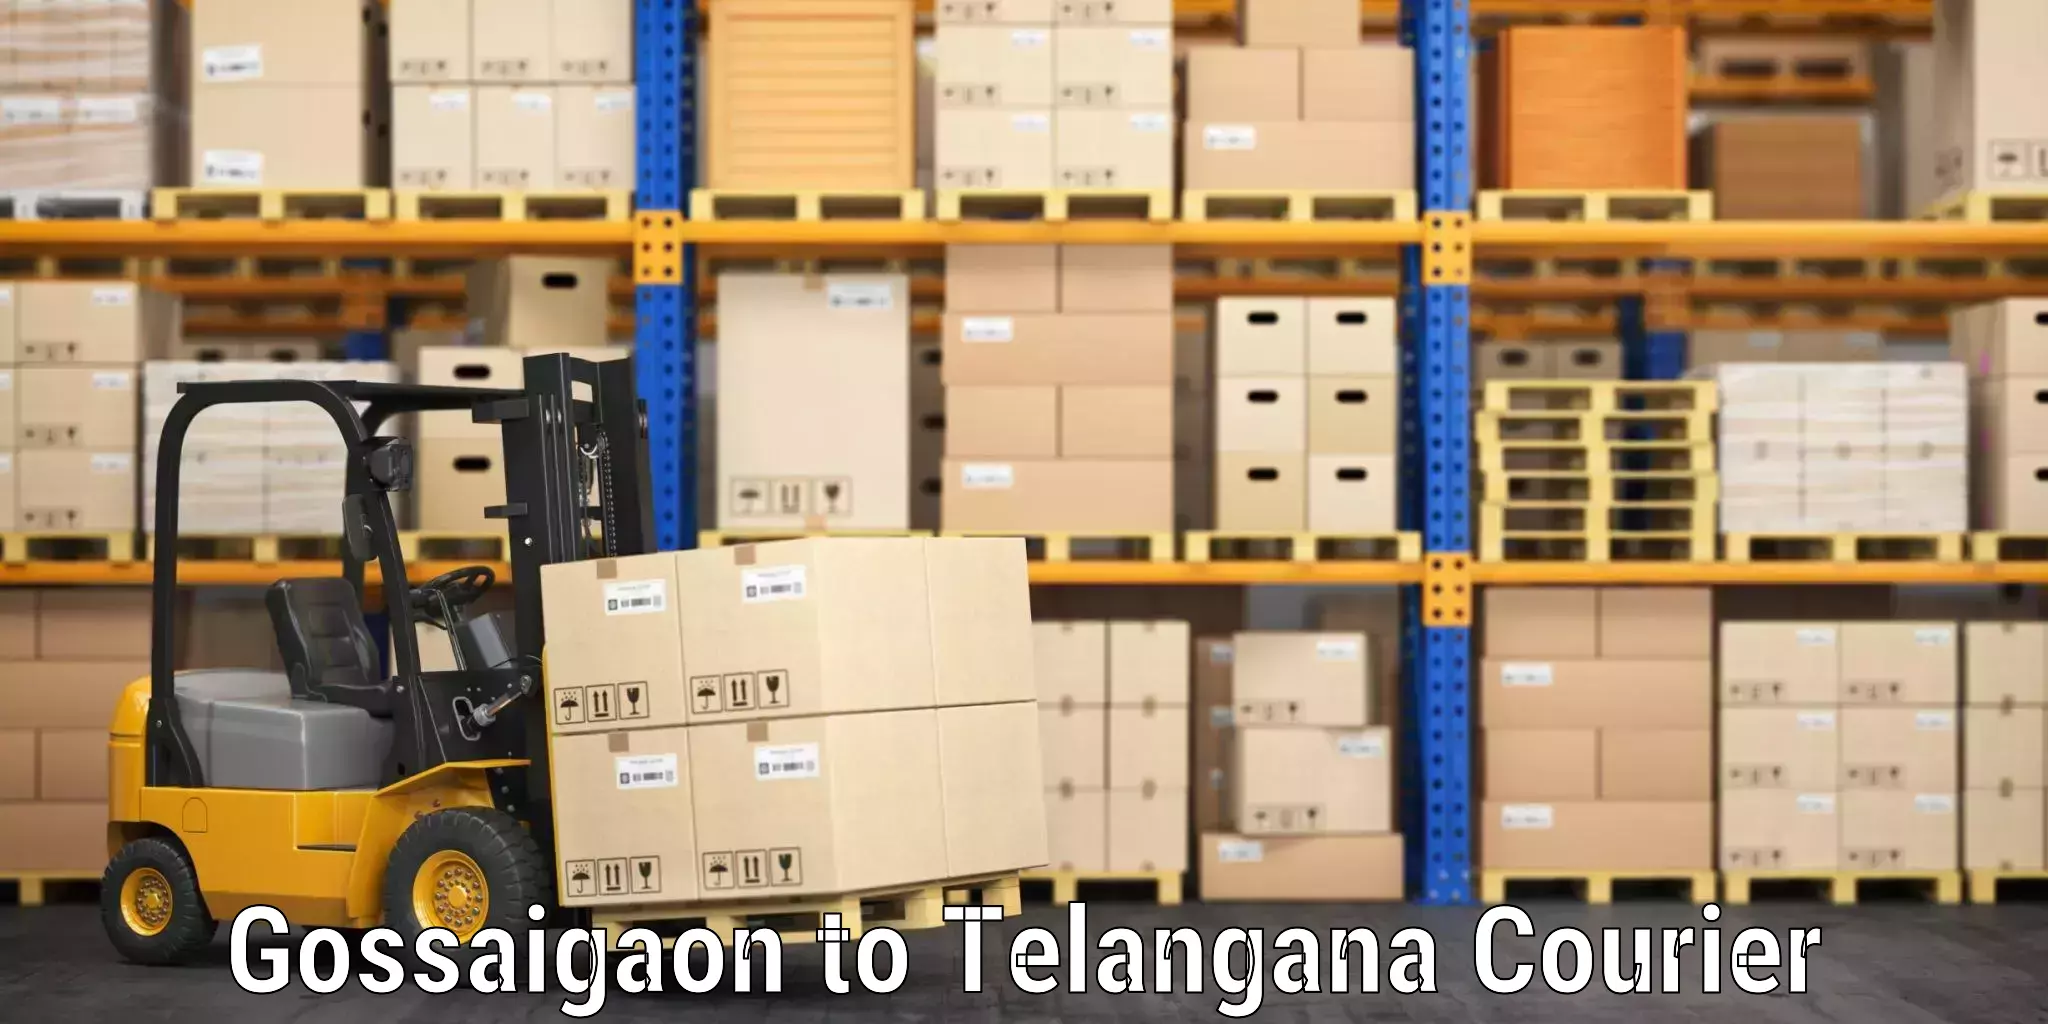 Baggage shipping service Gossaigaon to Mancherial